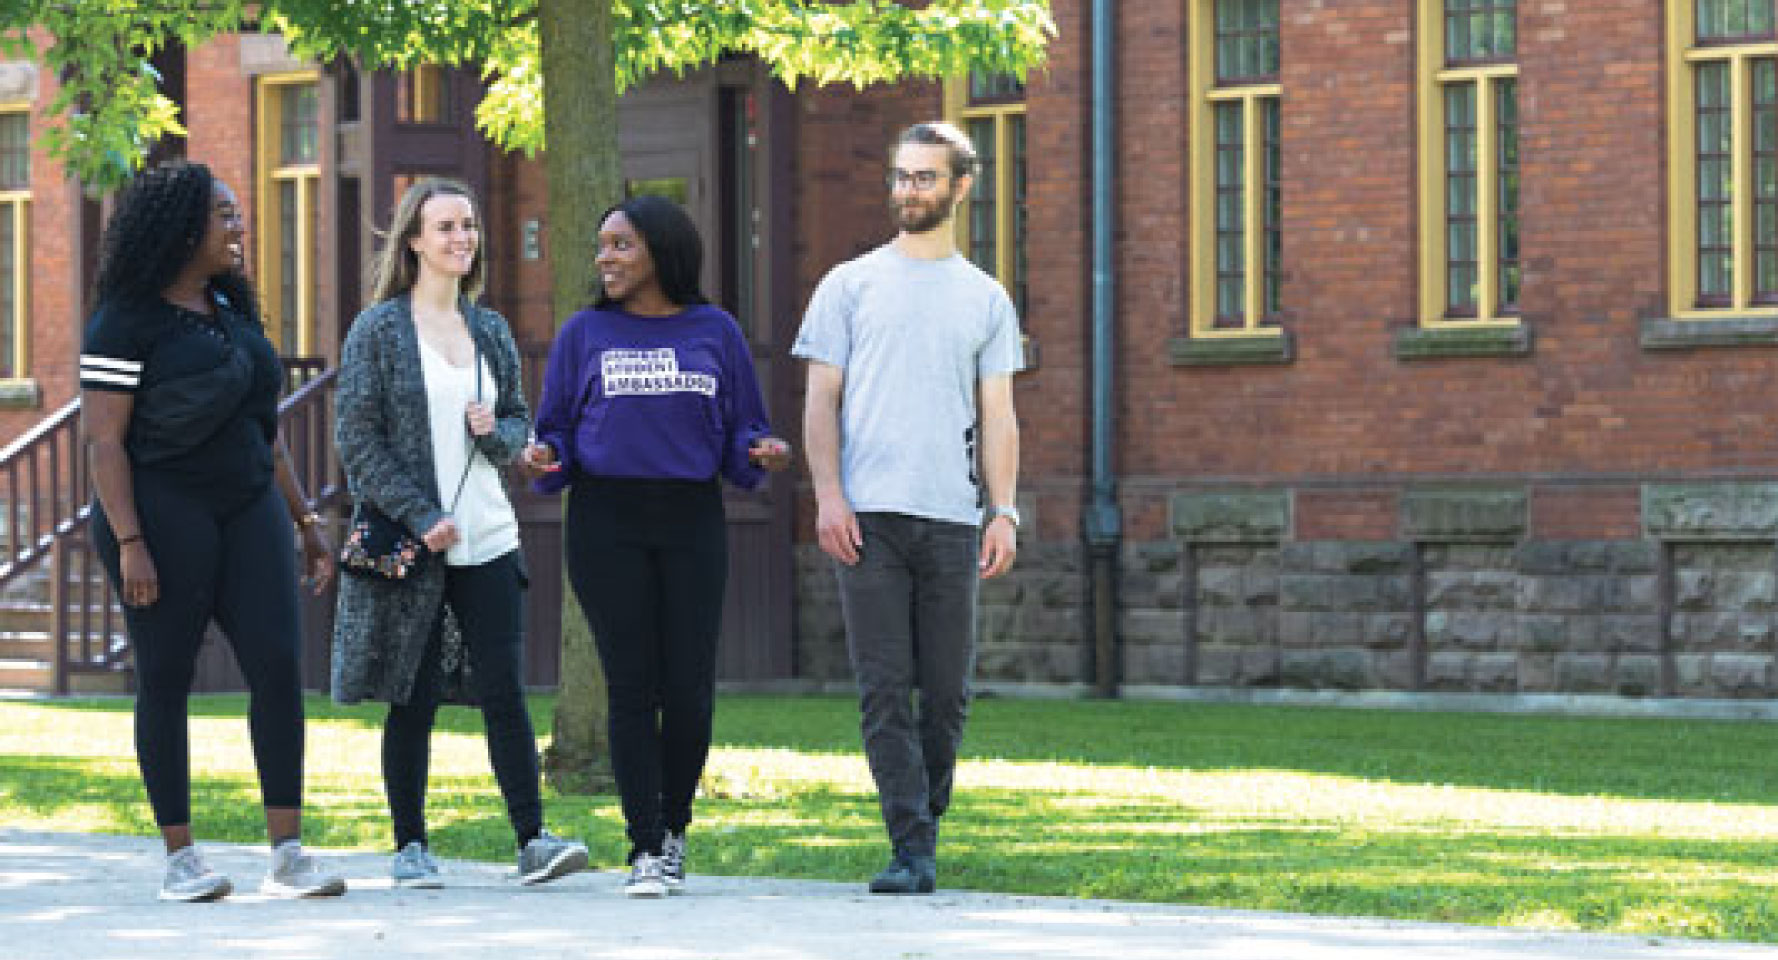 Diverse set of students walking together on a college